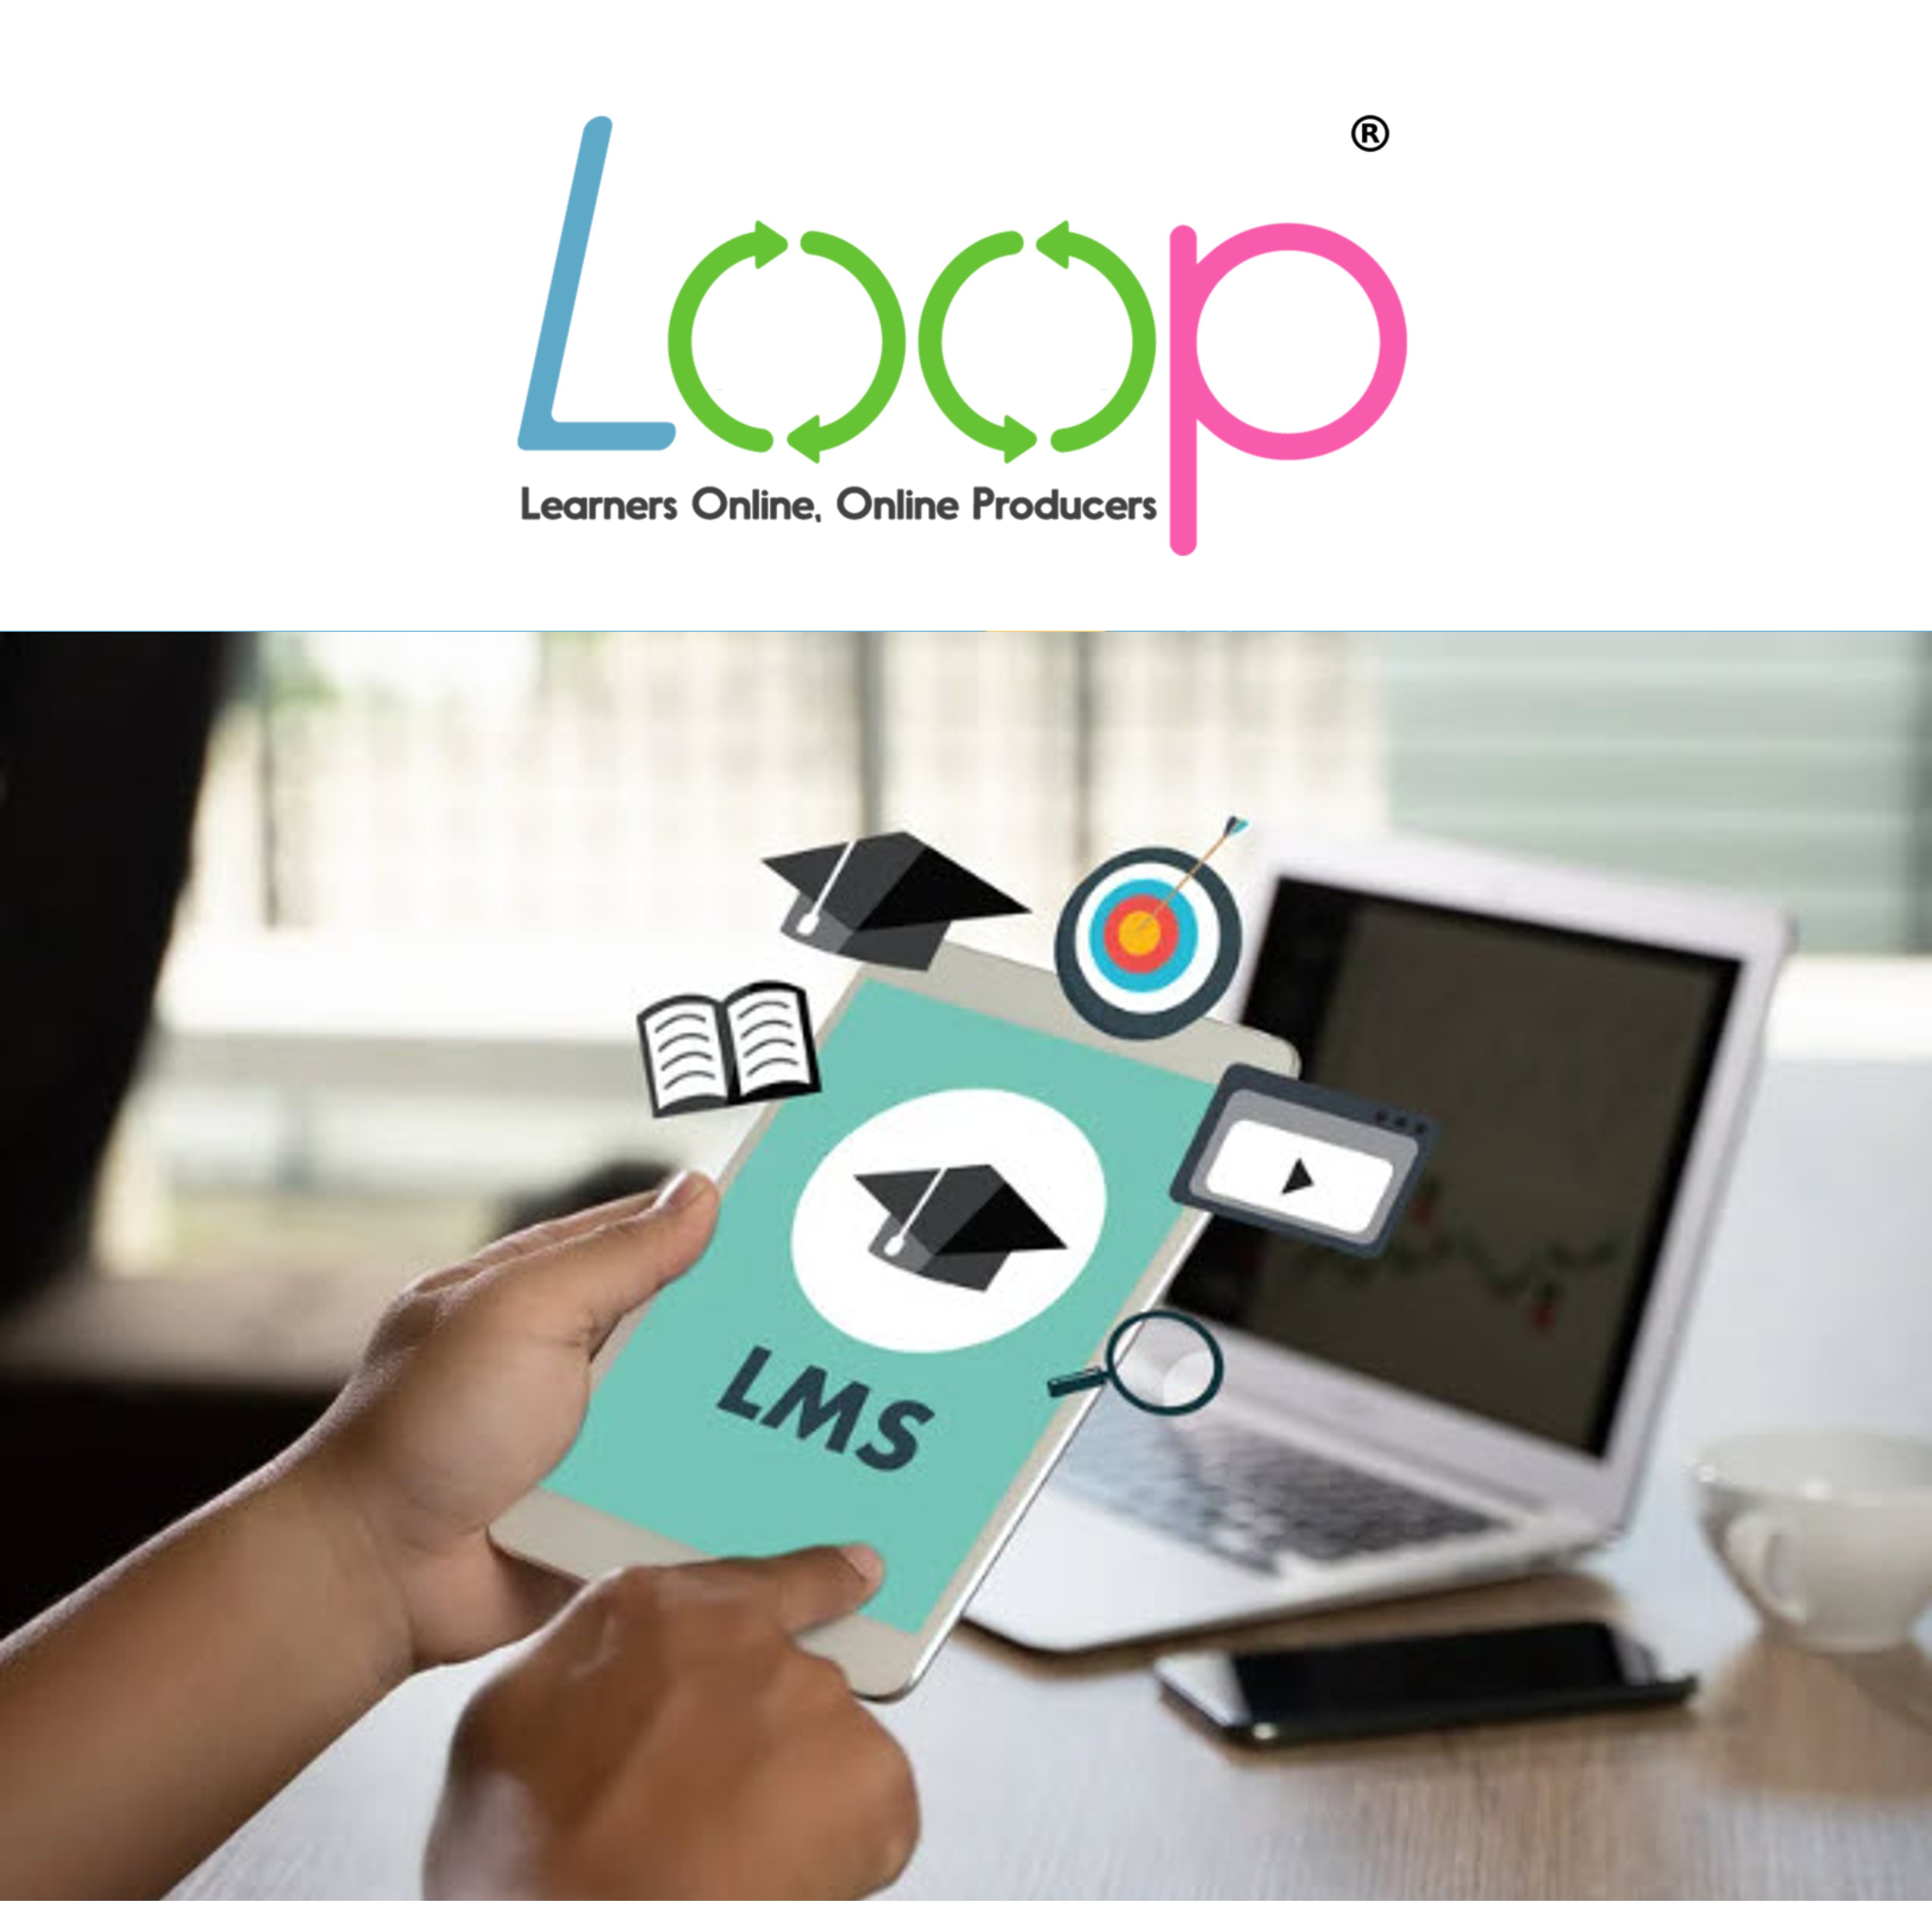 5 benefits you should know about LOOP LMS